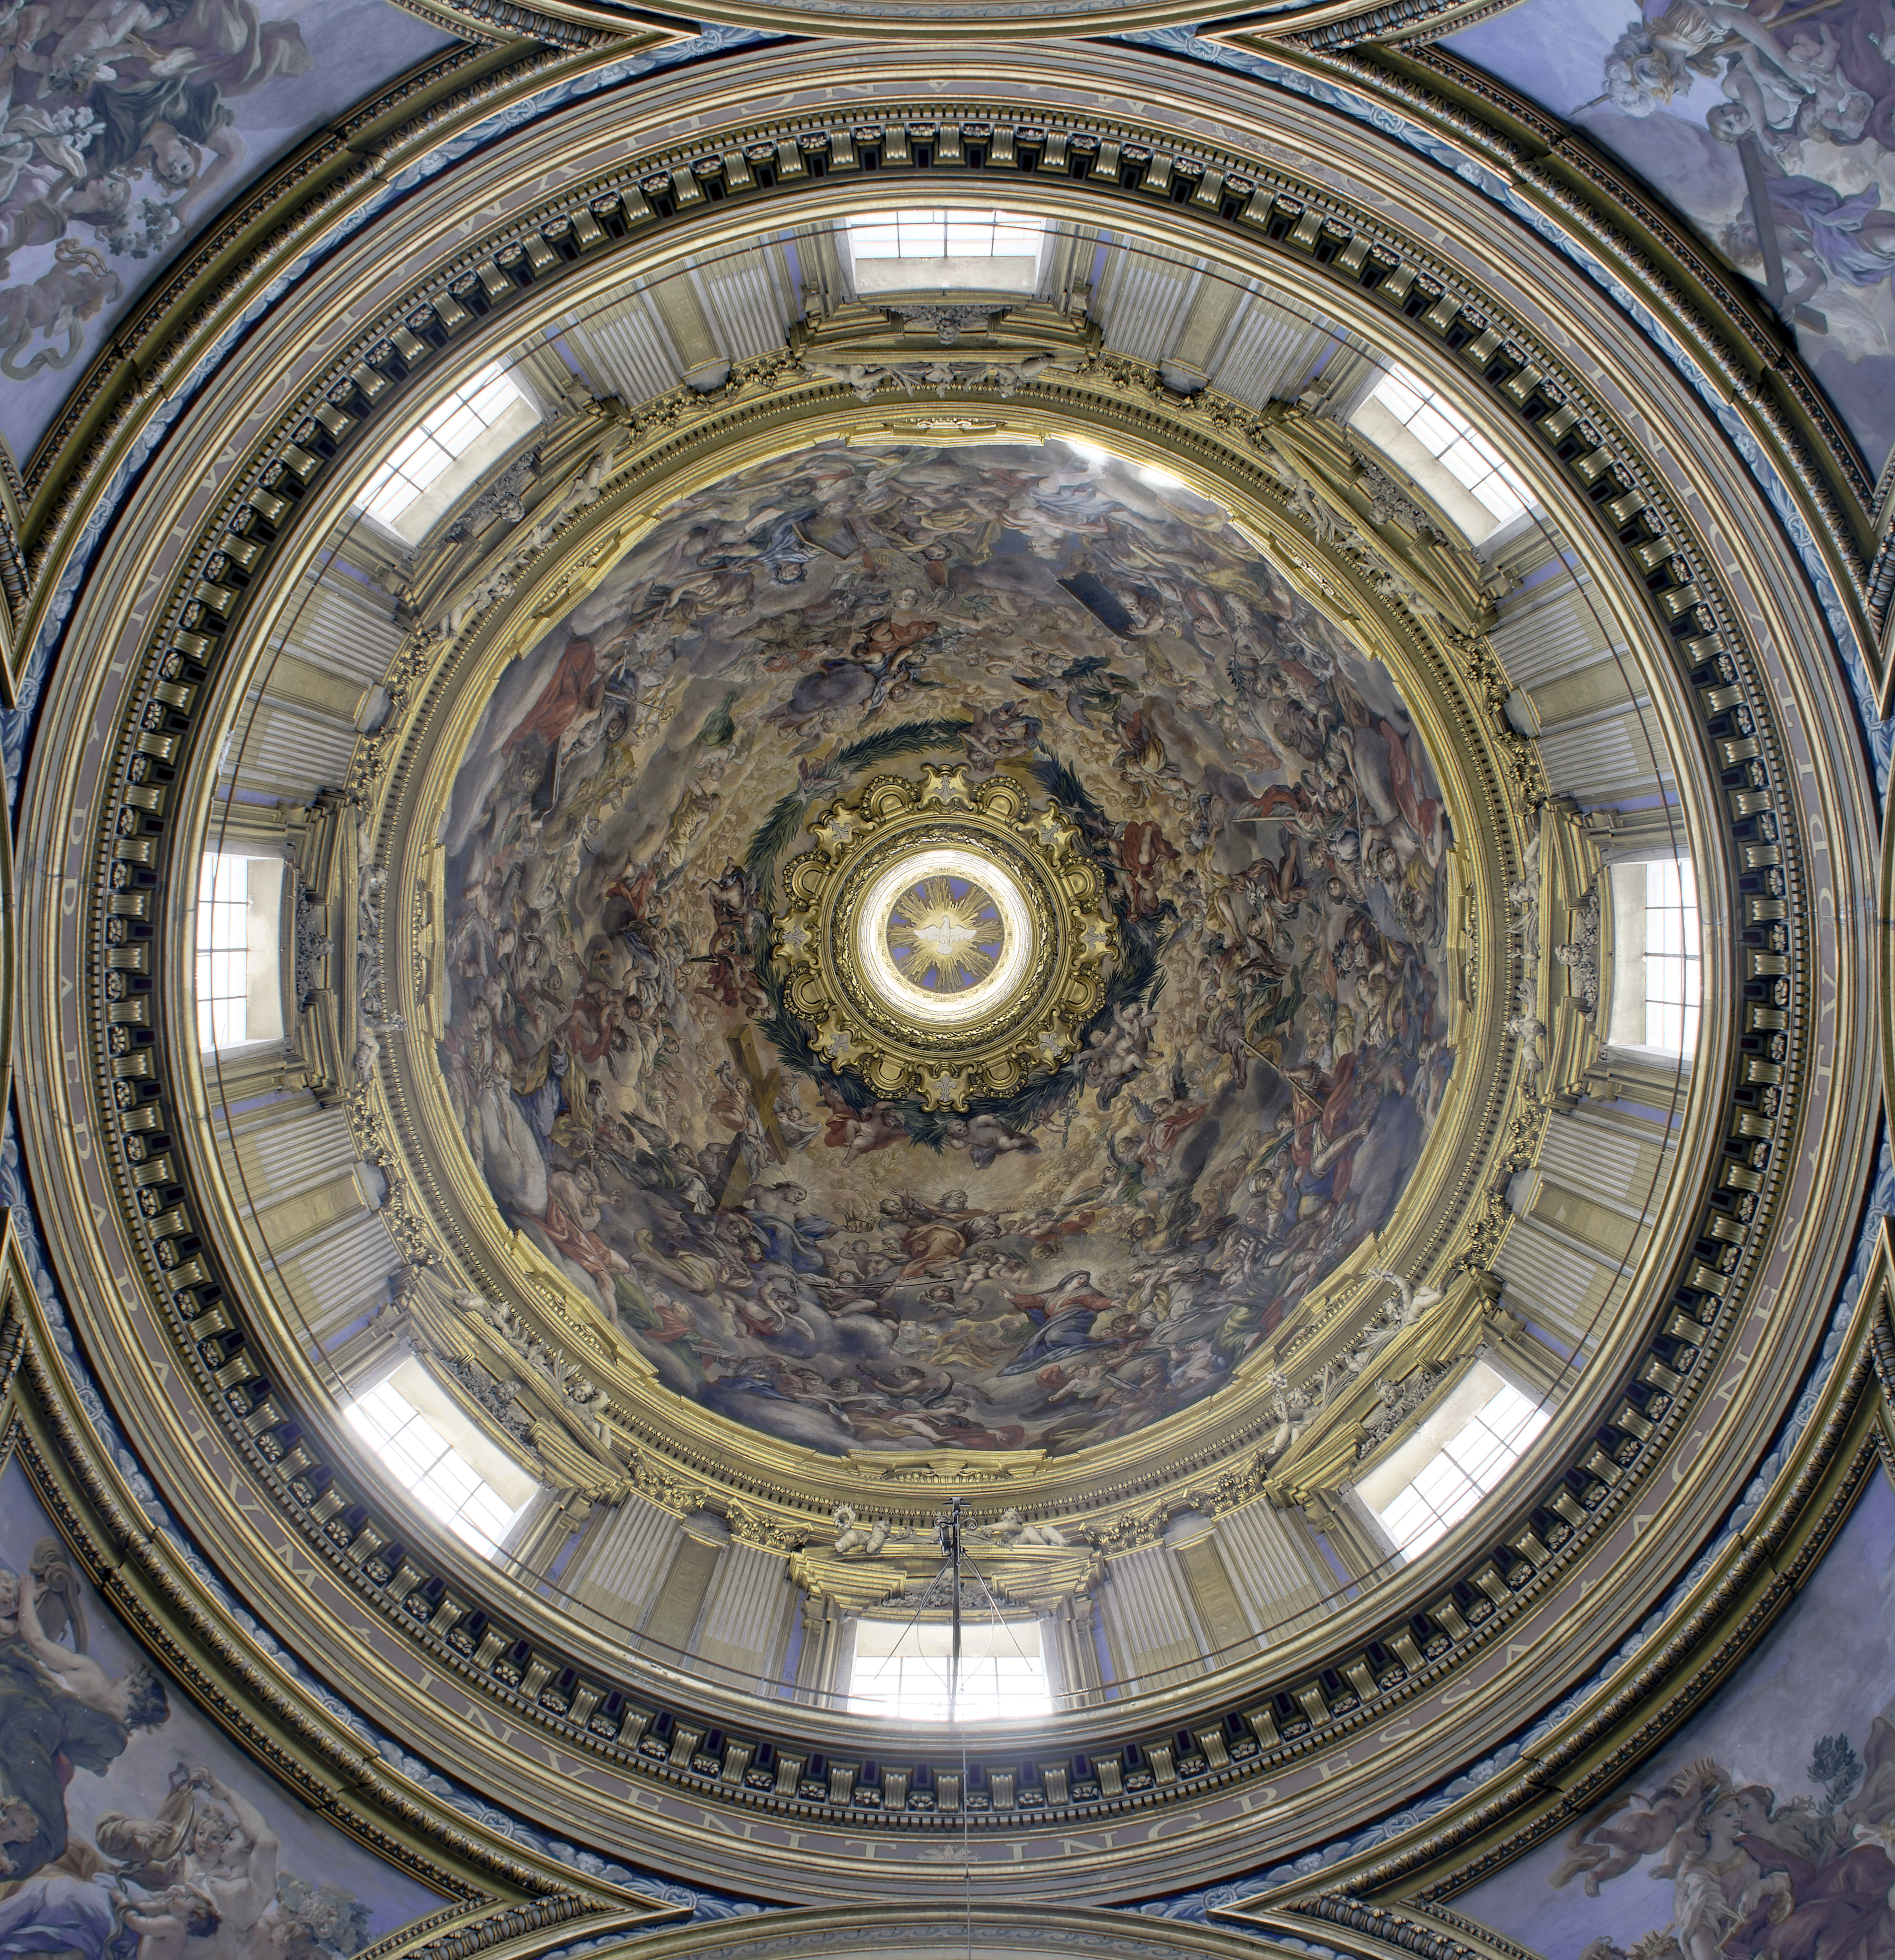 Dome of Sant'Agnese in Agone (Rome)